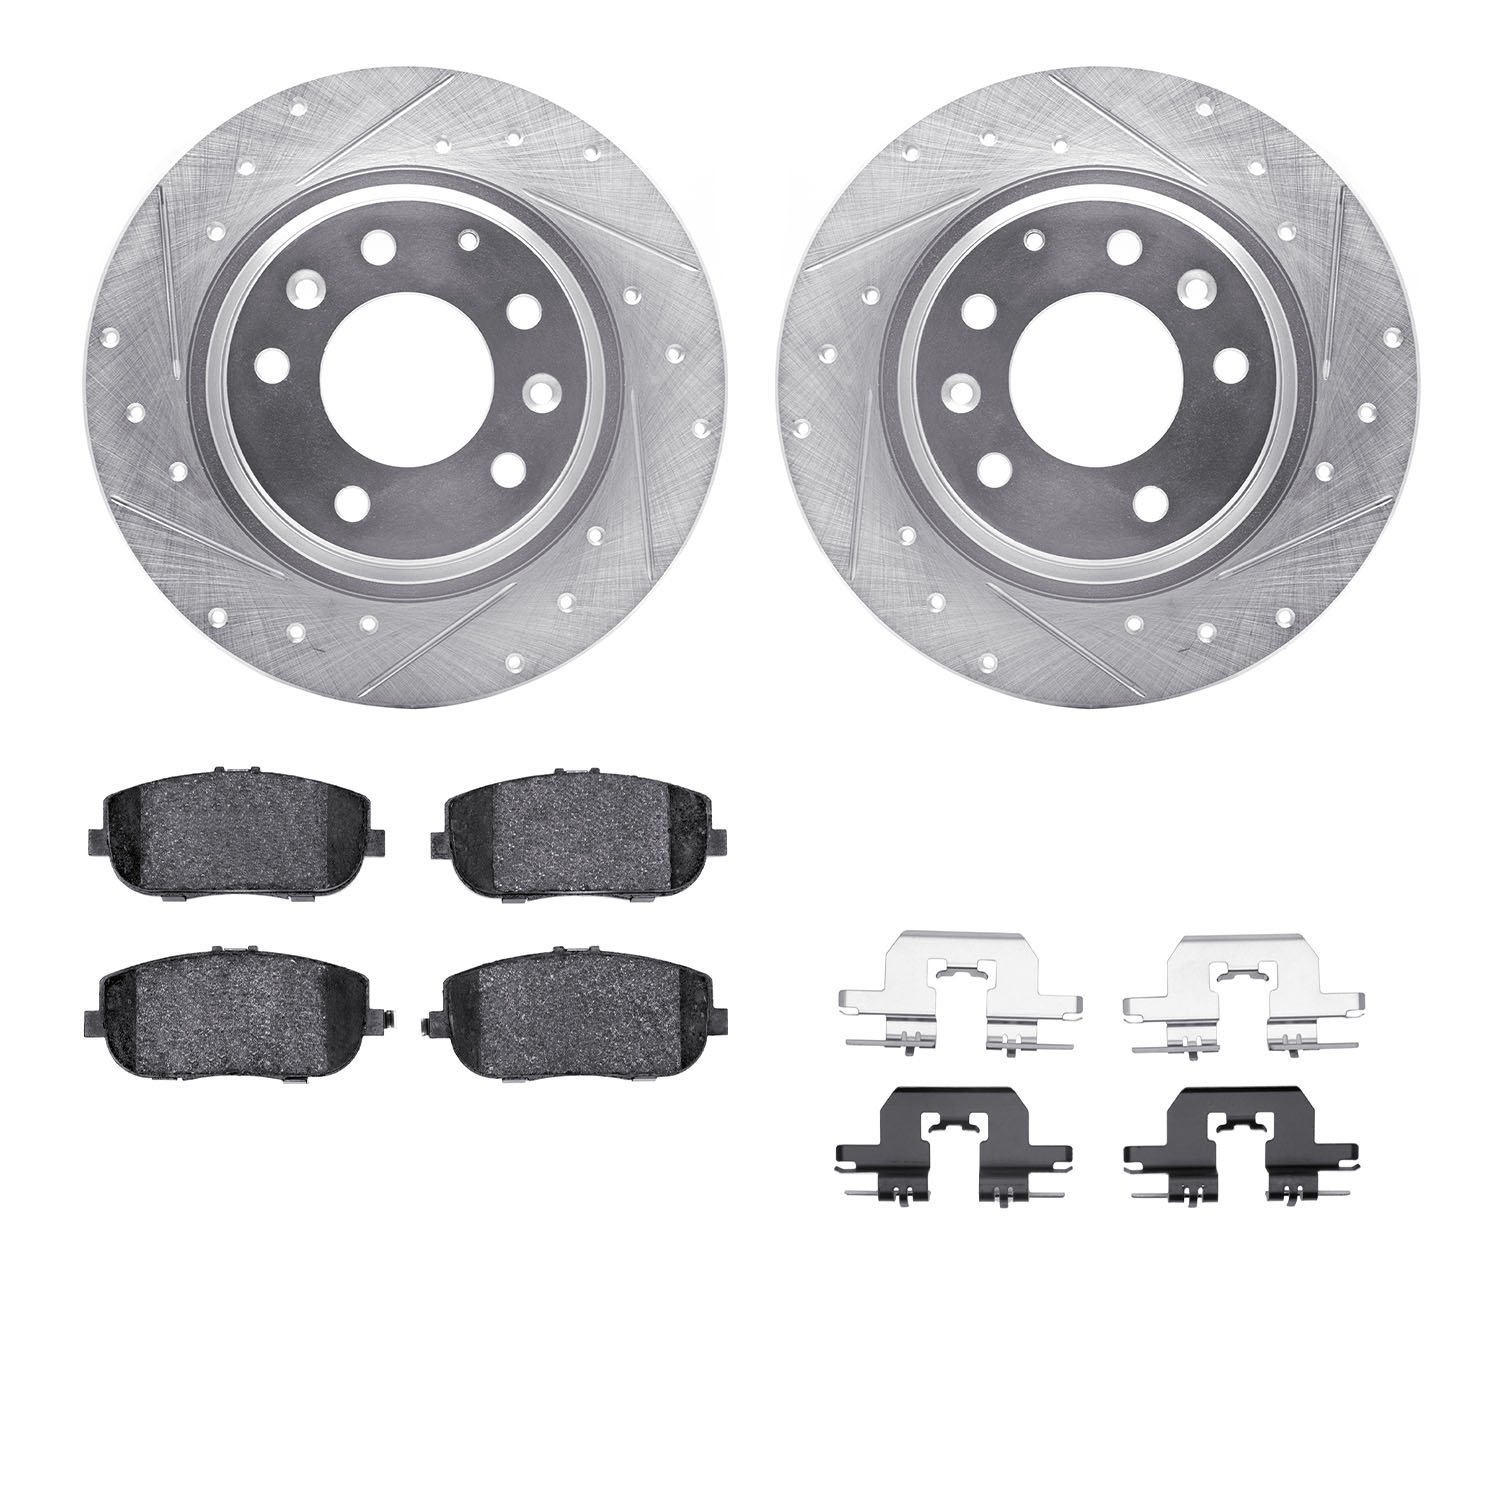 7312-54187 Drilled/Slotted Brake Rotor with 3000-Series Ceramic Brake Pads Kit & Hardware [Silver], 2006-2015 Ford/Lincoln/Mercu